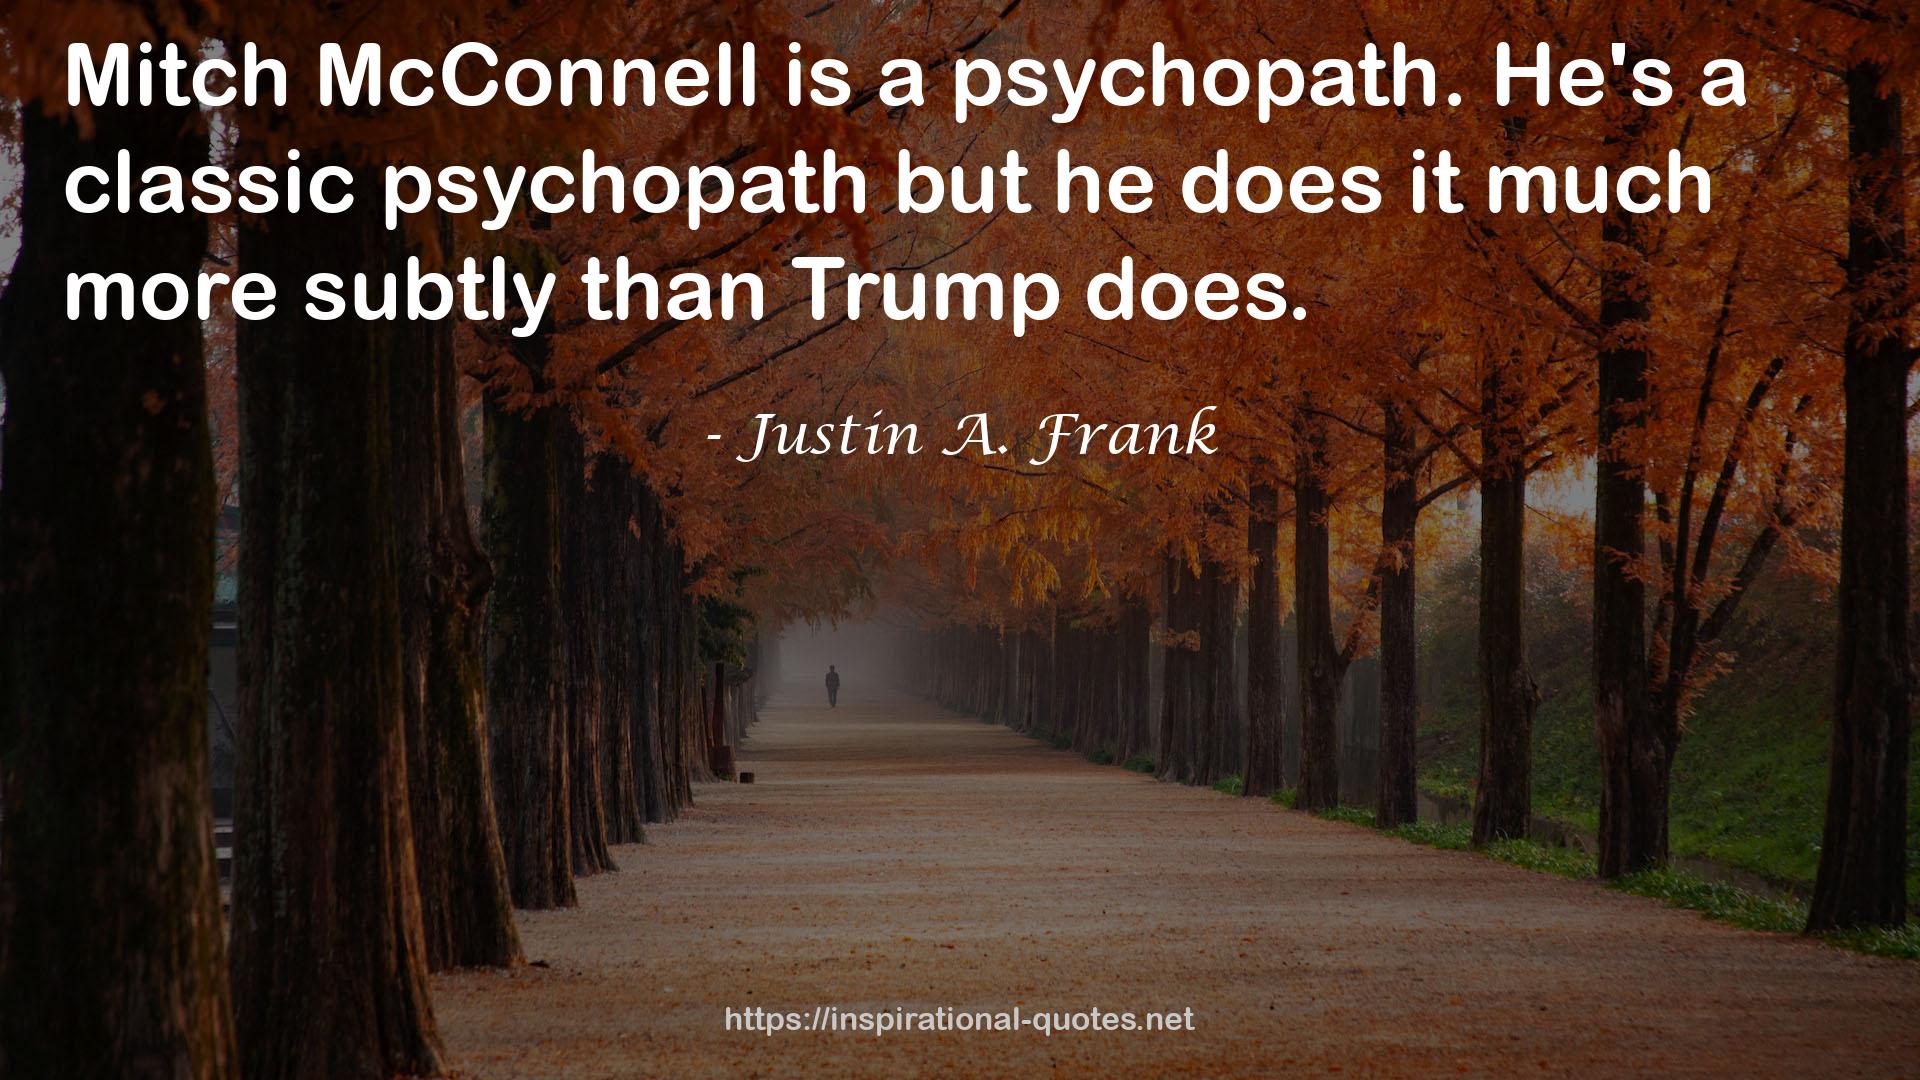 Justin A. Frank QUOTES